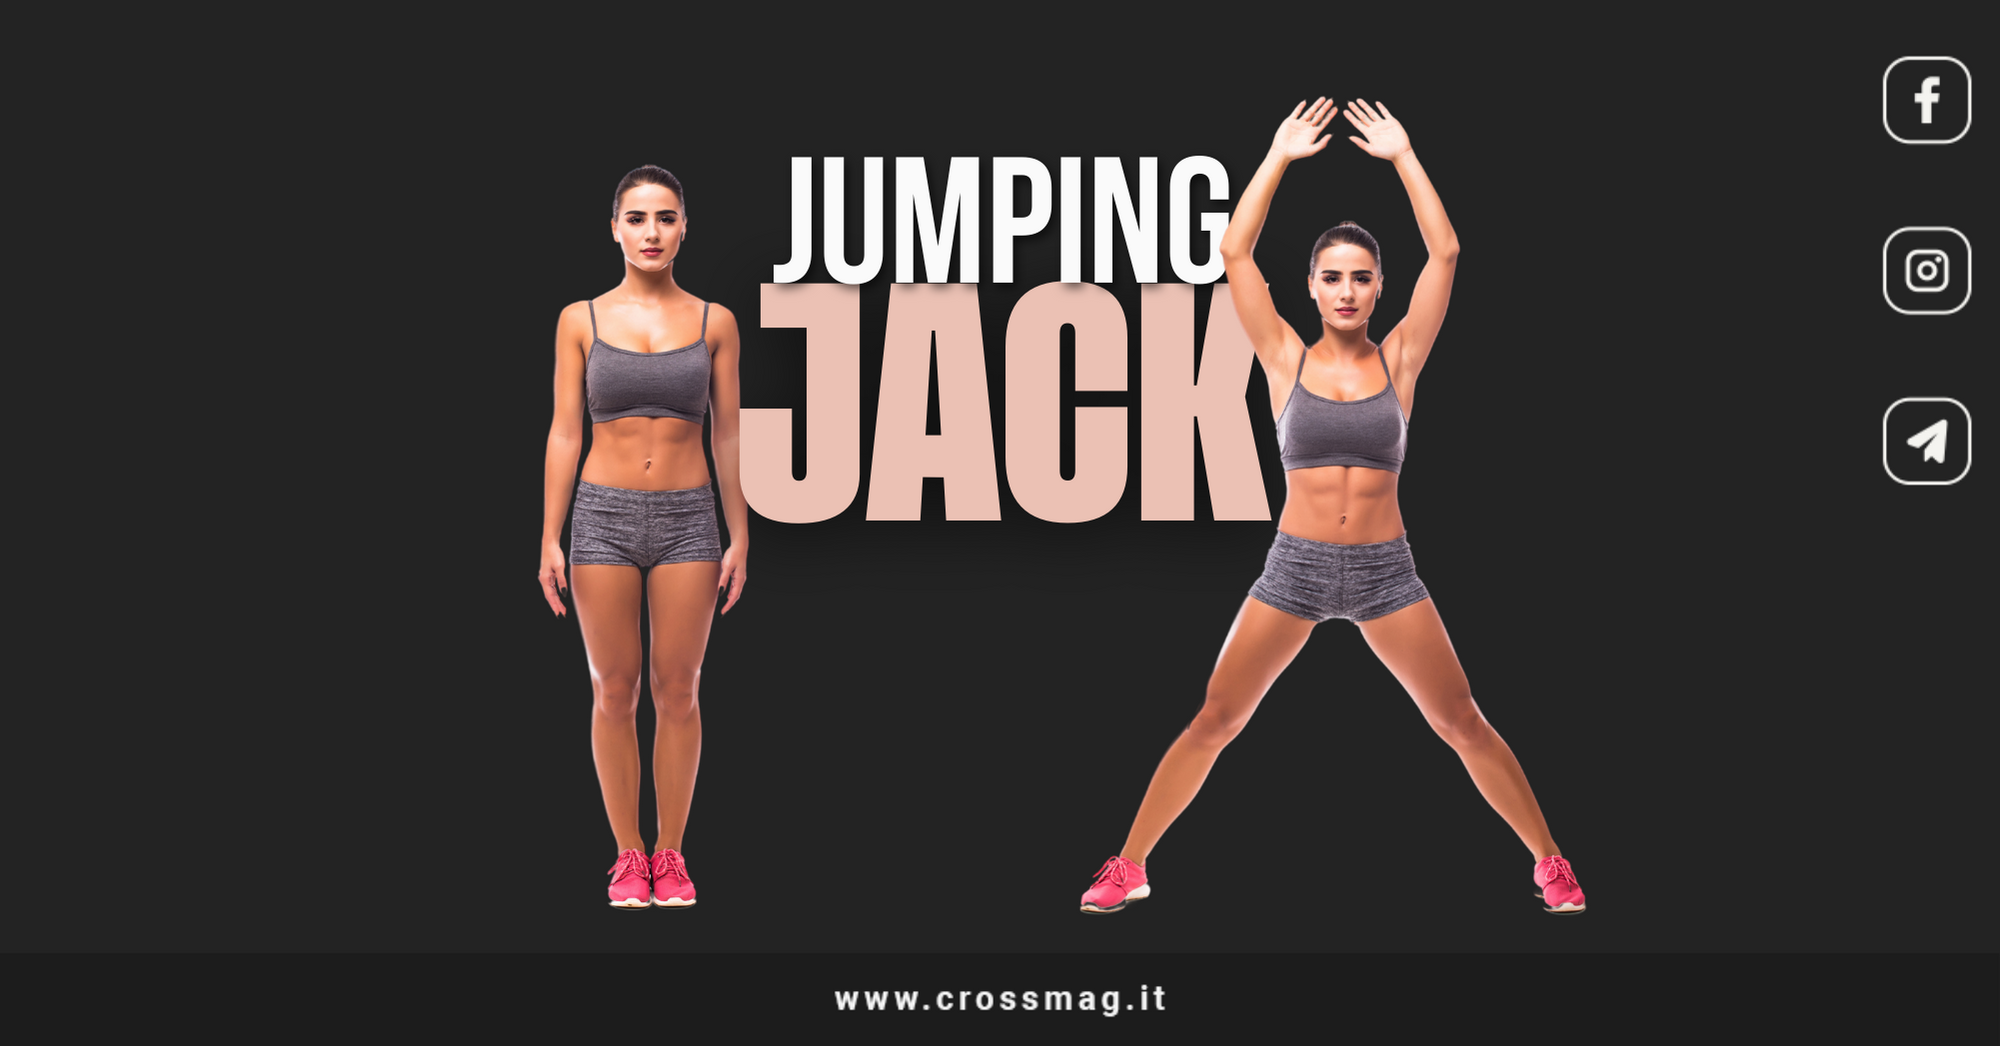 10 Benefits of Jumping Jacks & How to do a Jumping Jack